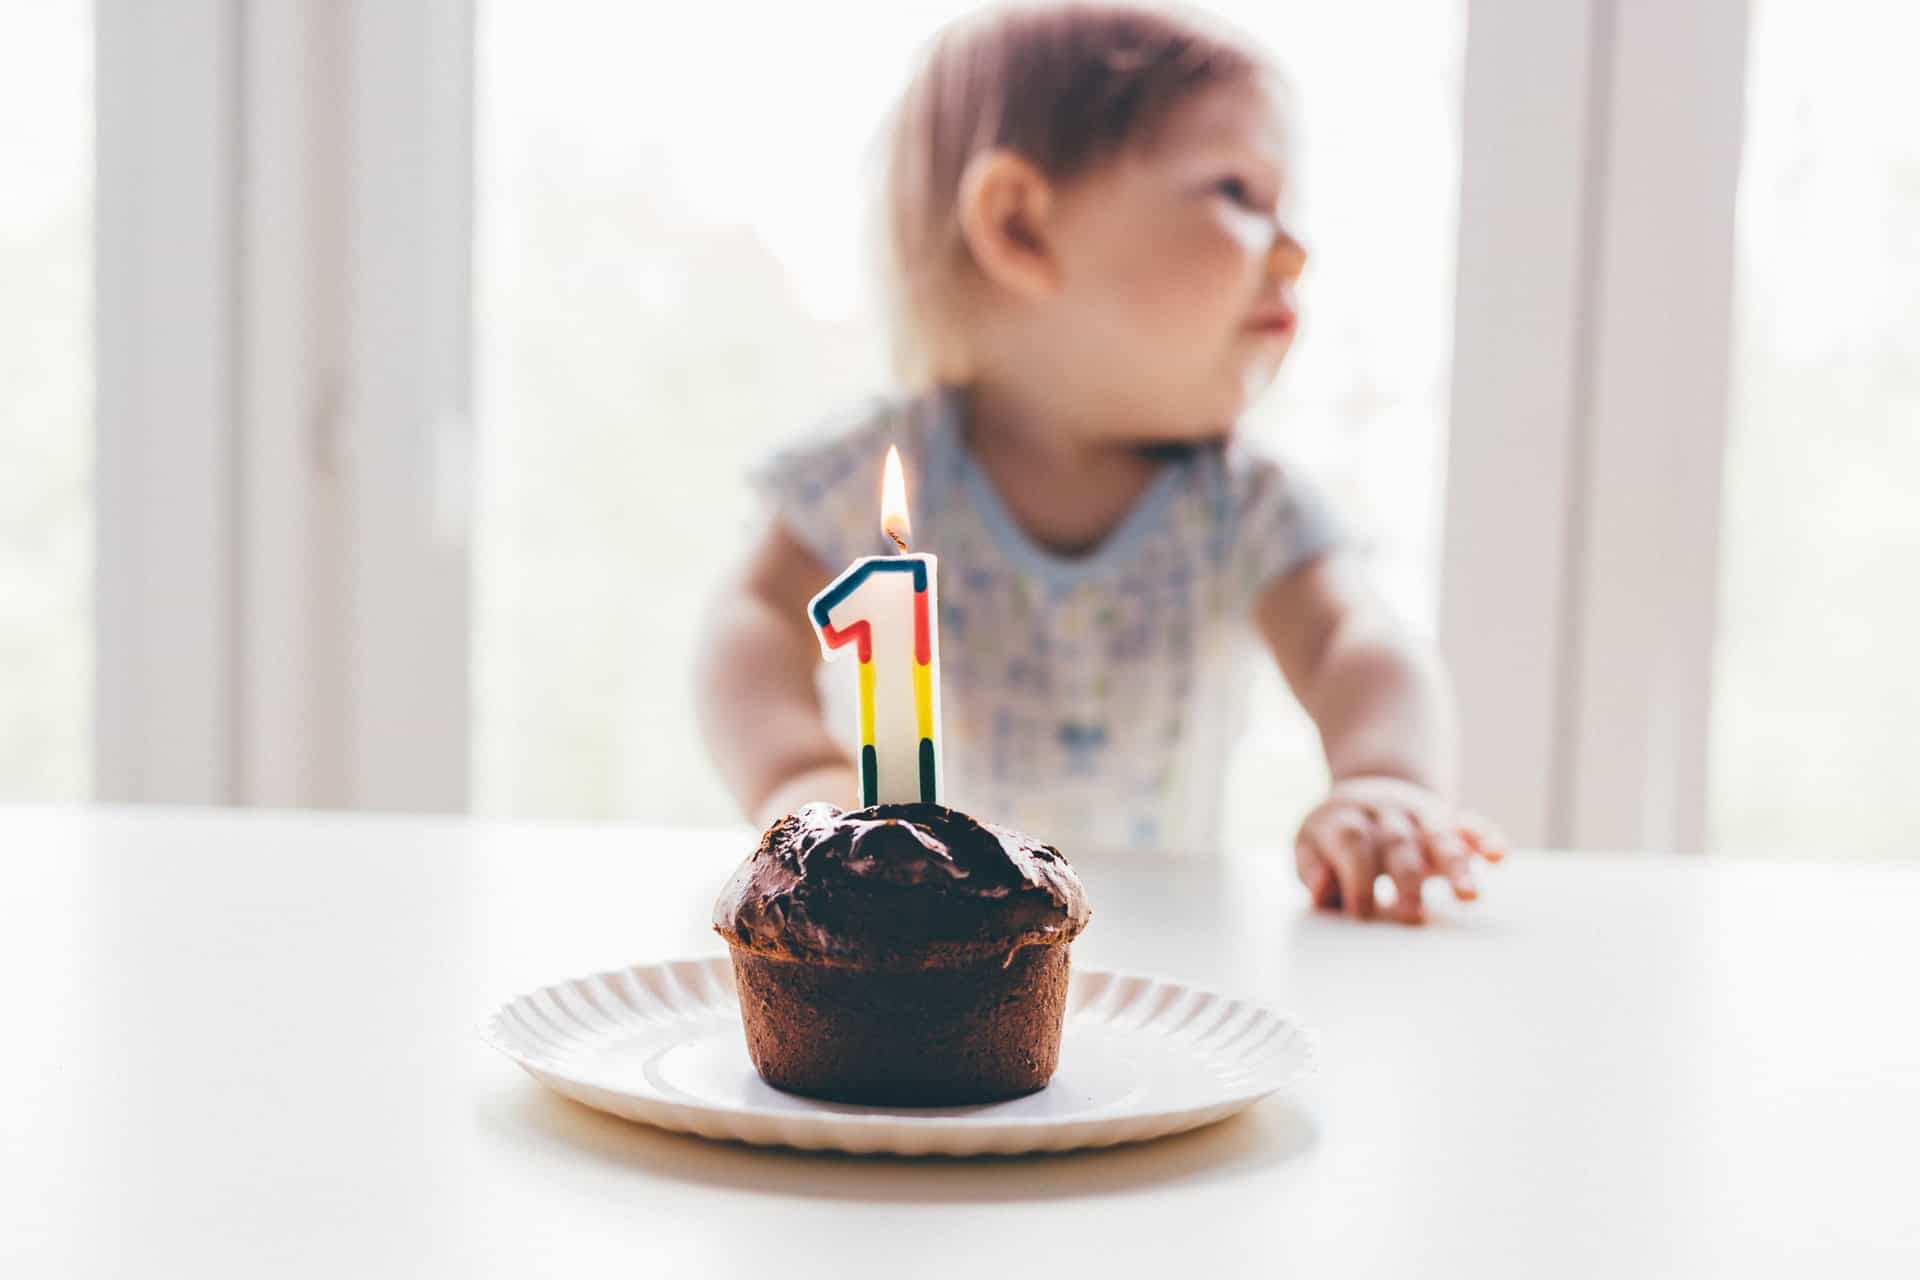 A chocolate cupcake with a “1” shaped candle and a toddler in the background.